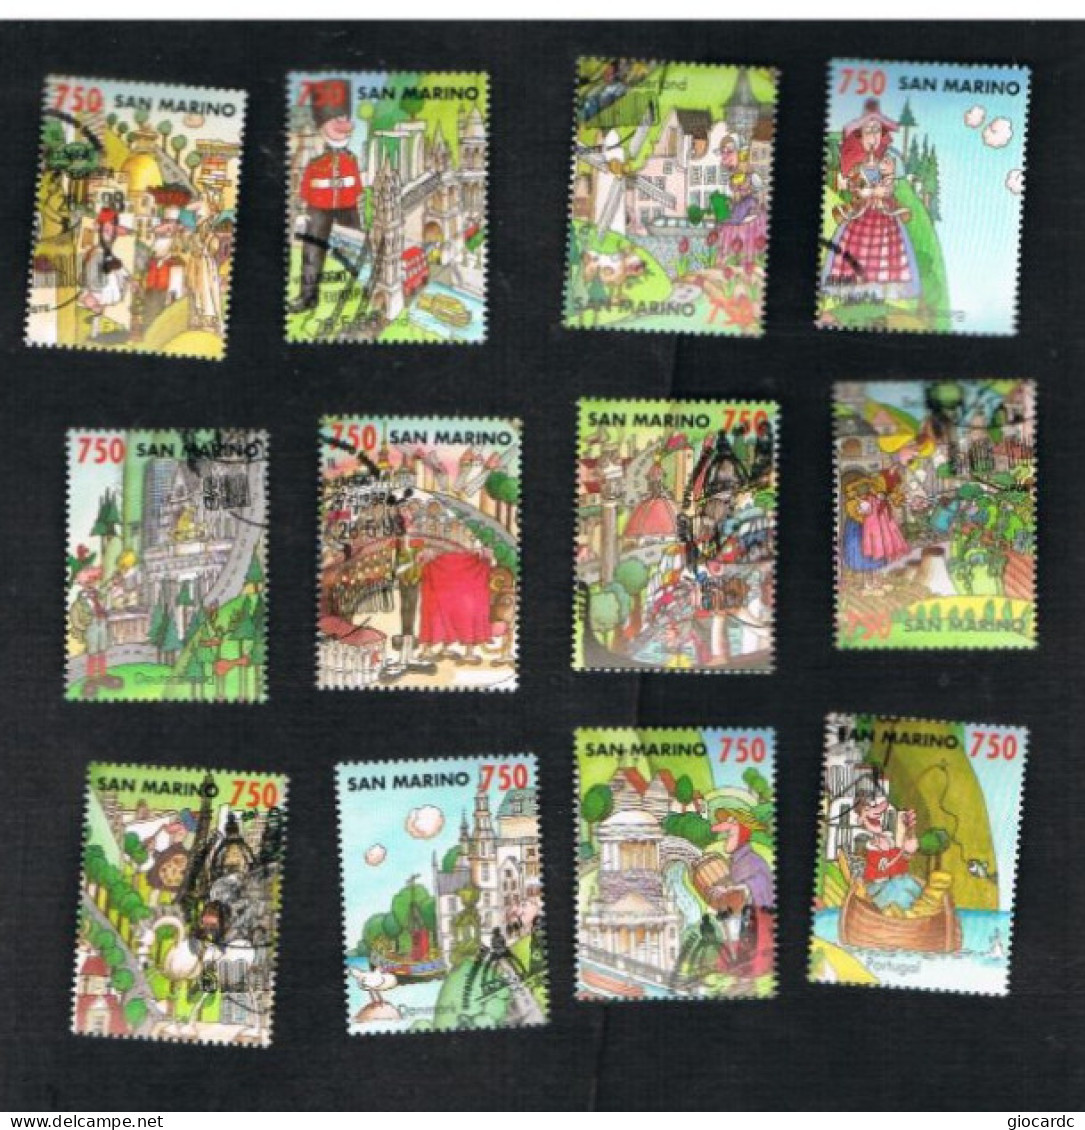 SAN MARINO - UN 1382.1393 - 1993 IL VILLAGGIO EUROPA (COMPLET SET OF 12 STAMPS, BY BF)     -  USED - Gebraucht